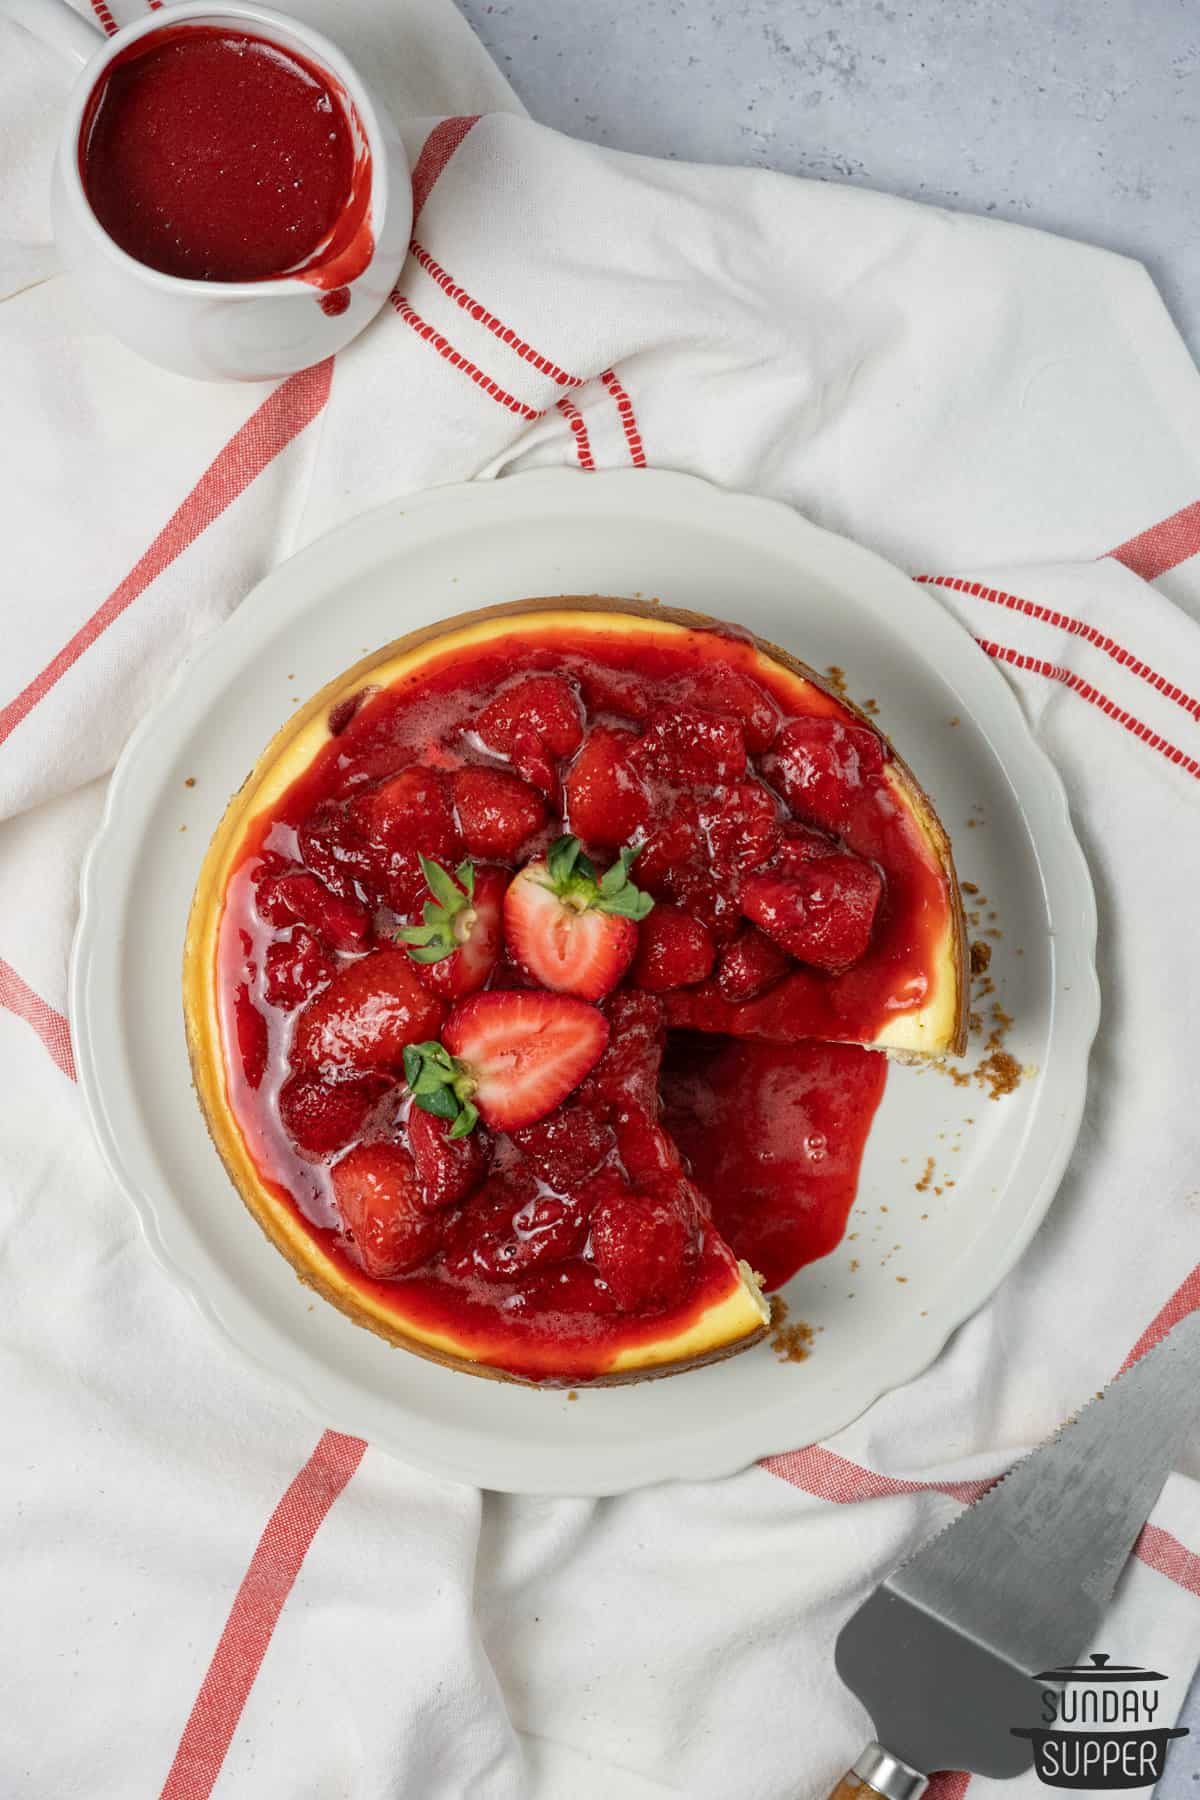 cheesecake with strawberry sauce over top